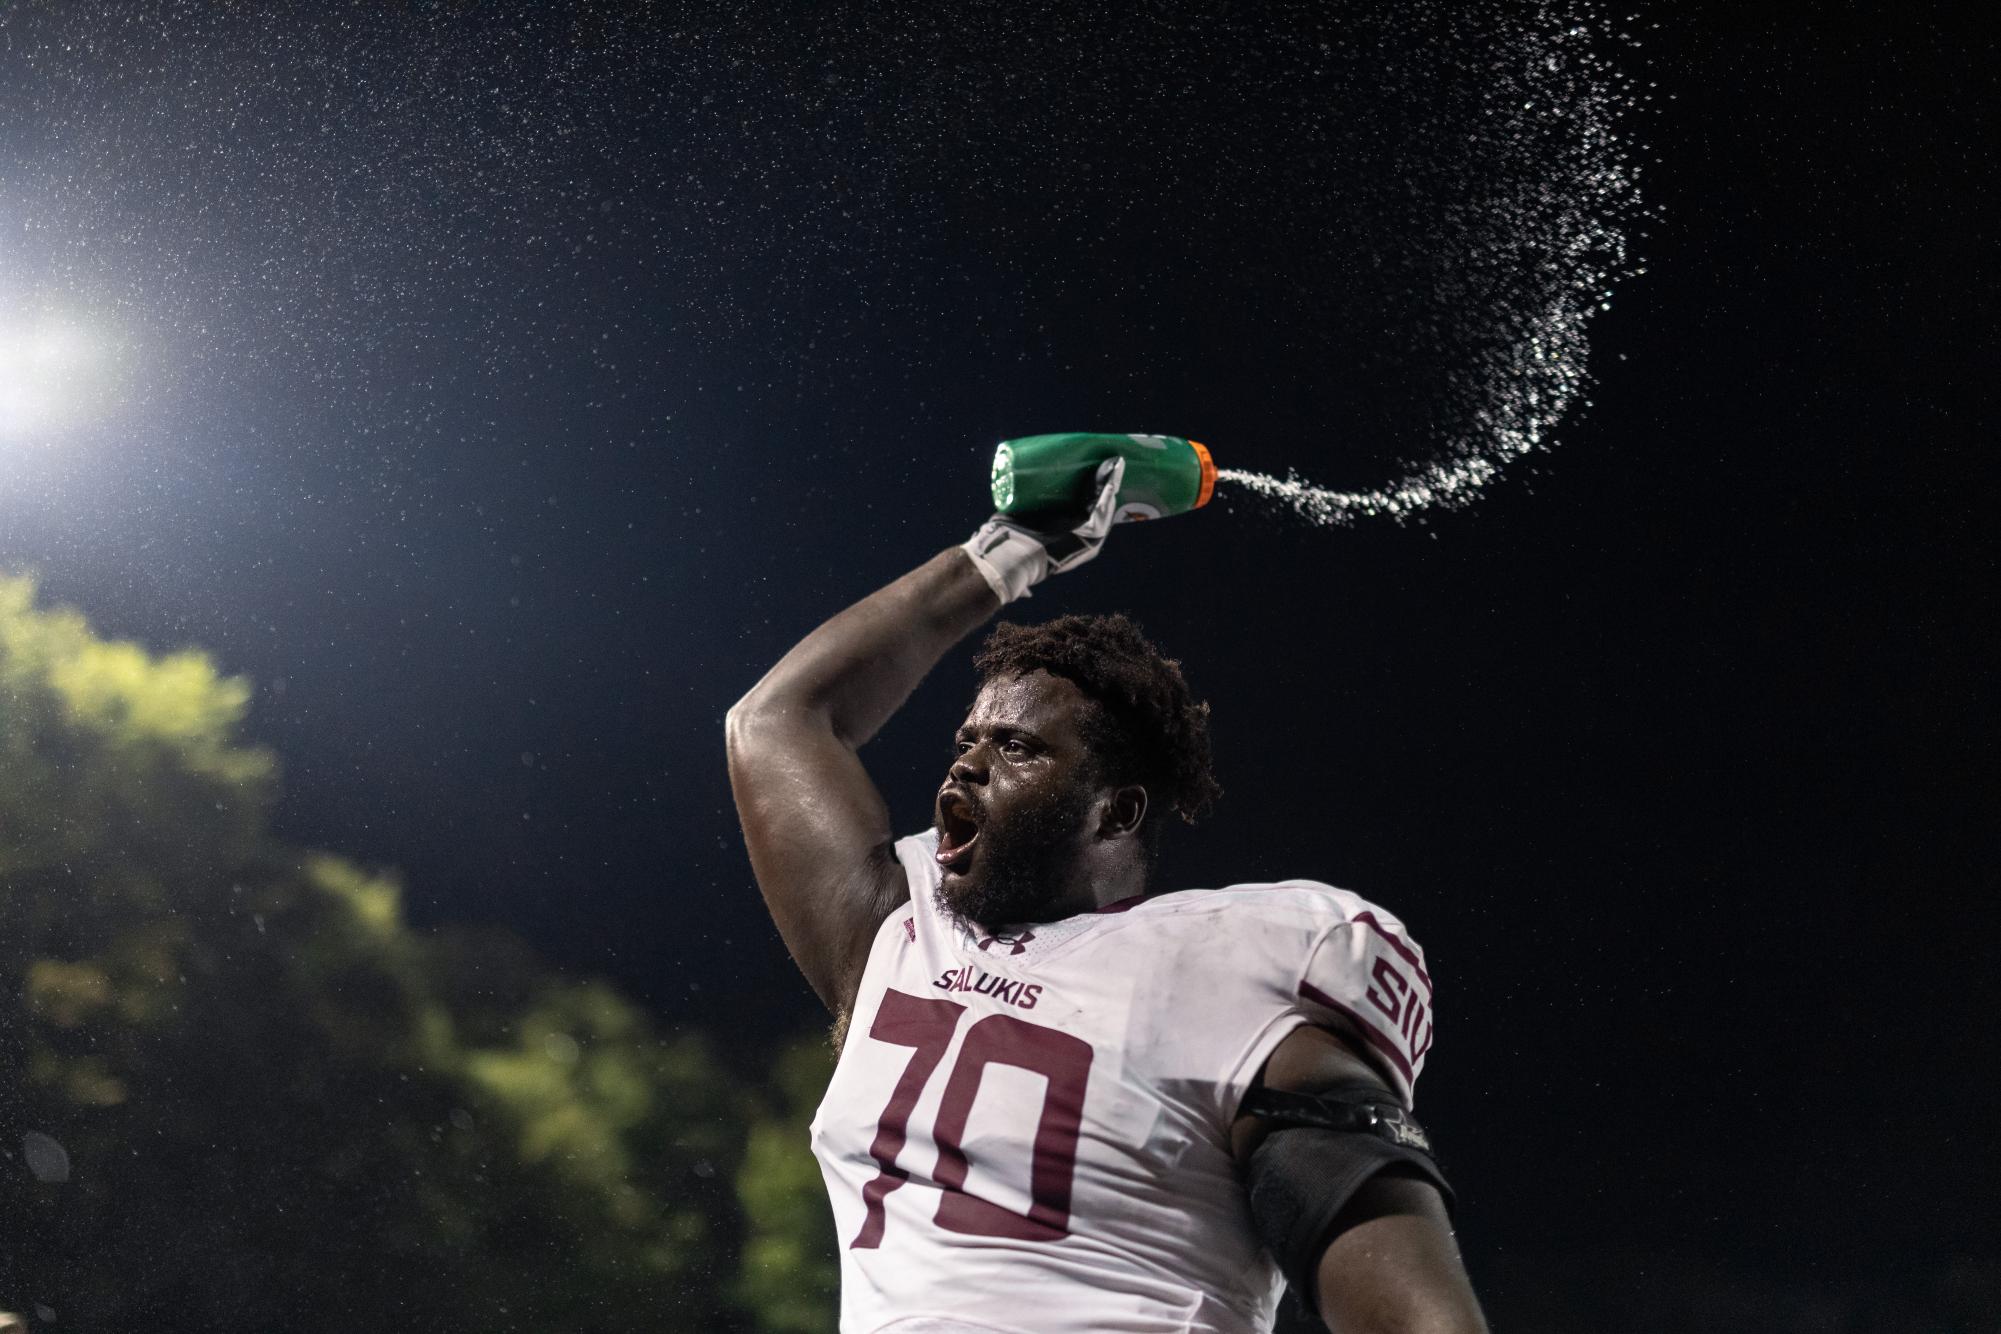 Abdou Toure (70) sprays water from the team gatorade bottles at the Dawg Pound in celebration as the Salukis pull ahead of the SEMO Redhawks by one point with a touchdown in the last few seconds of the fourth Sept. 16, 2023 at Houck Stadium in Cape Girardeau, Missouri.